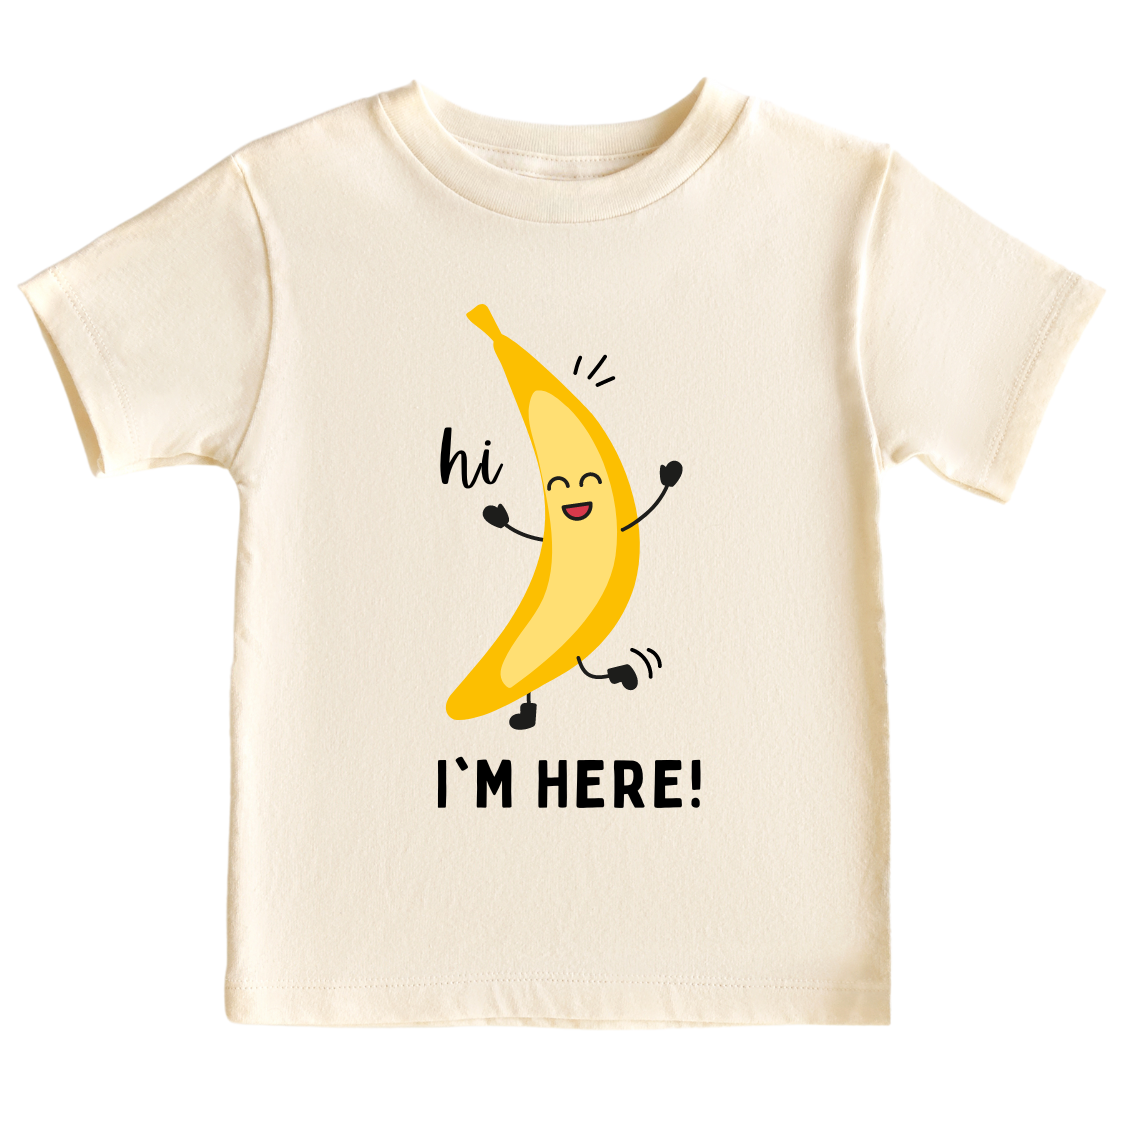 Natural Kids t-shirt with adorable banana graphic and 'Hi, I'm Here' text. Stylish and comfortable shirt for kids' fashion